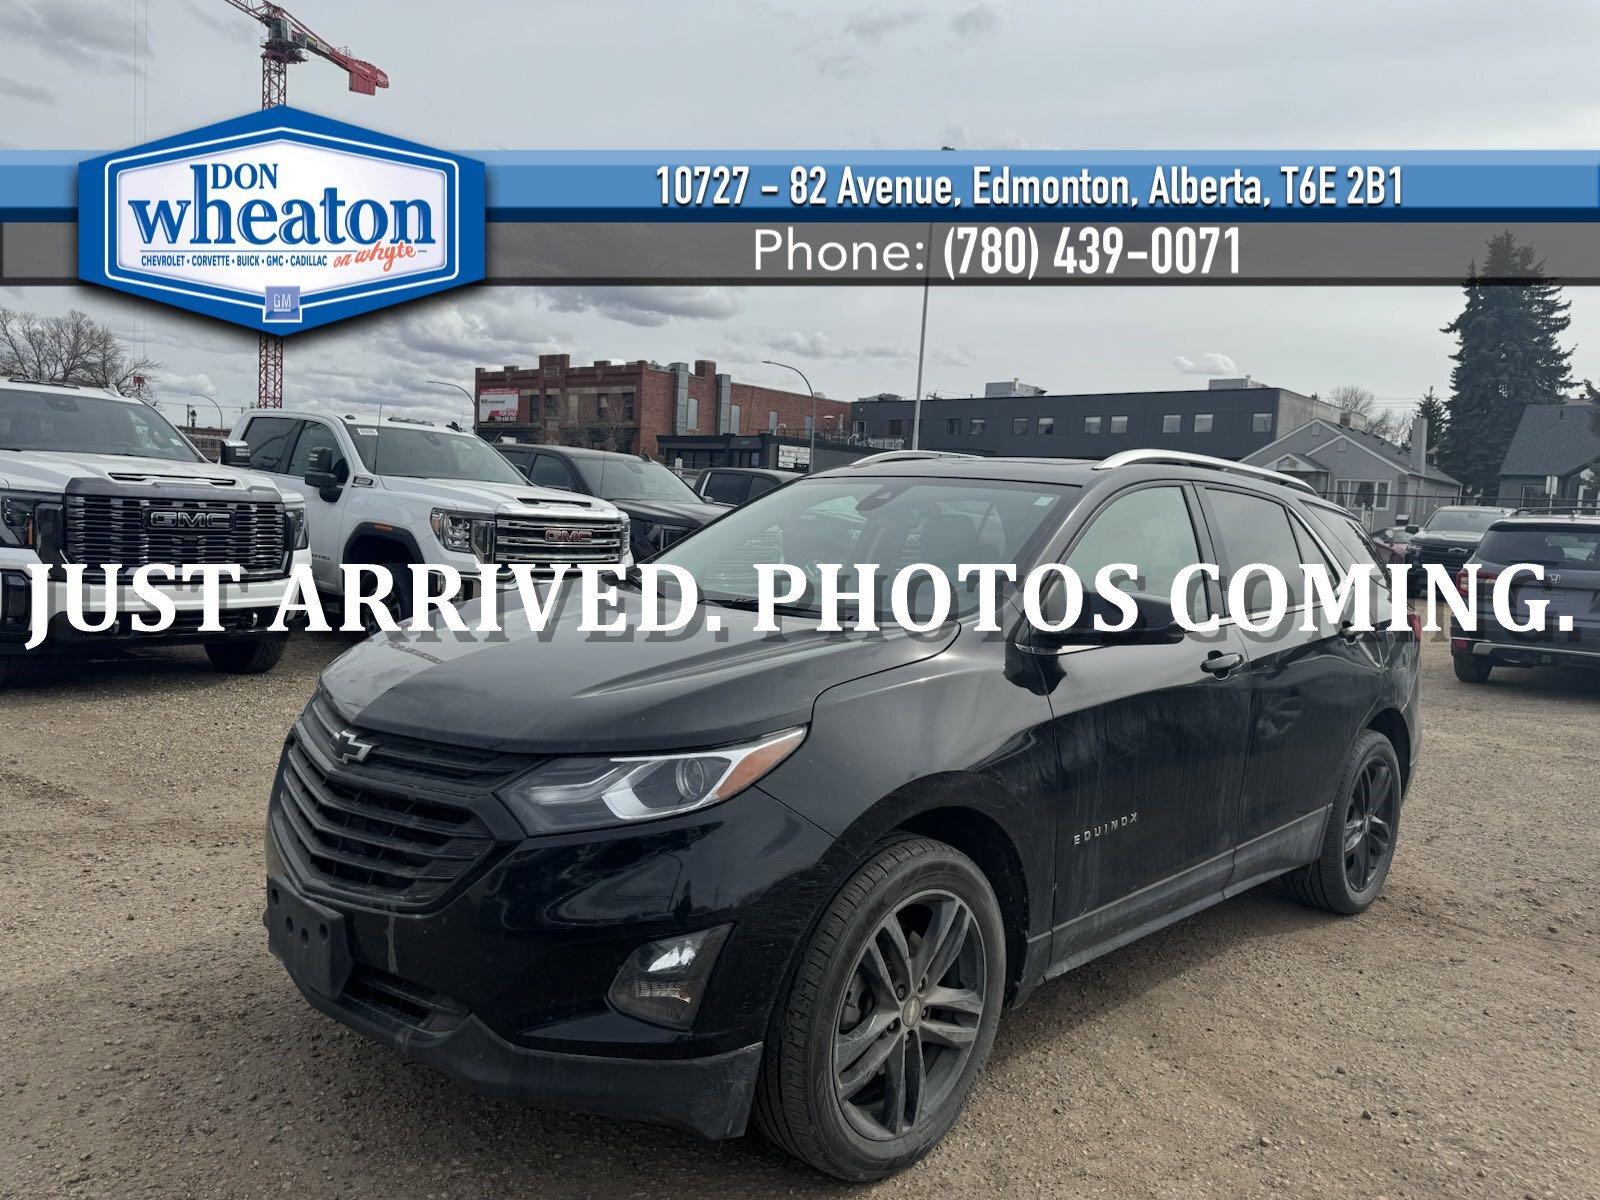 2020 Chevrolet Equinox LT 2.0L AWD Sunroof Heated Leather Seats Remote St